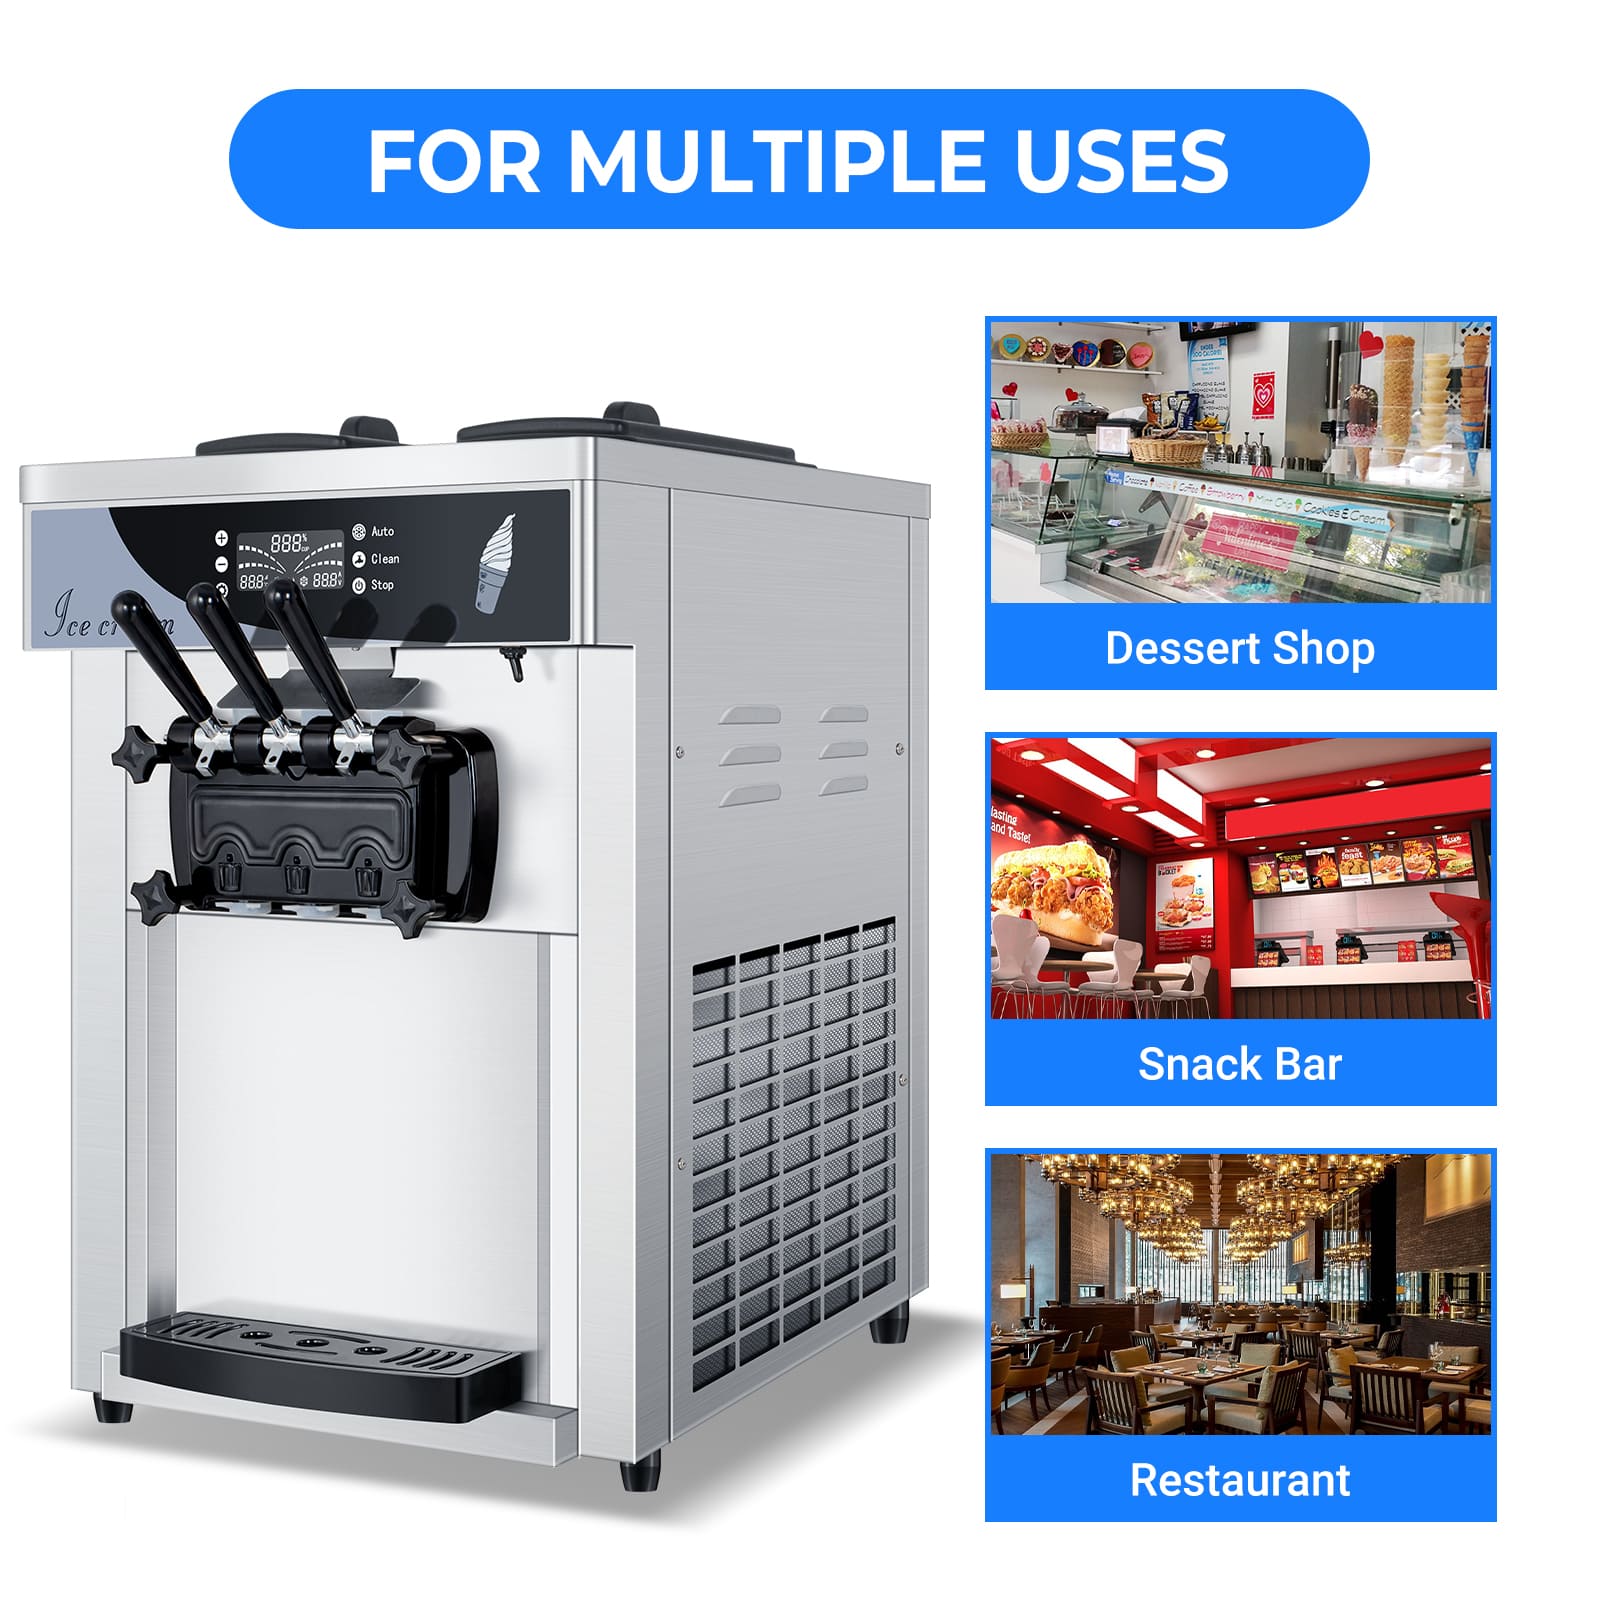 Leevot Commercial Soft Serve Countertop Ice Cream Machine with 2 Hoppers and 3 Dispensers for Restaurants and Snack Bars